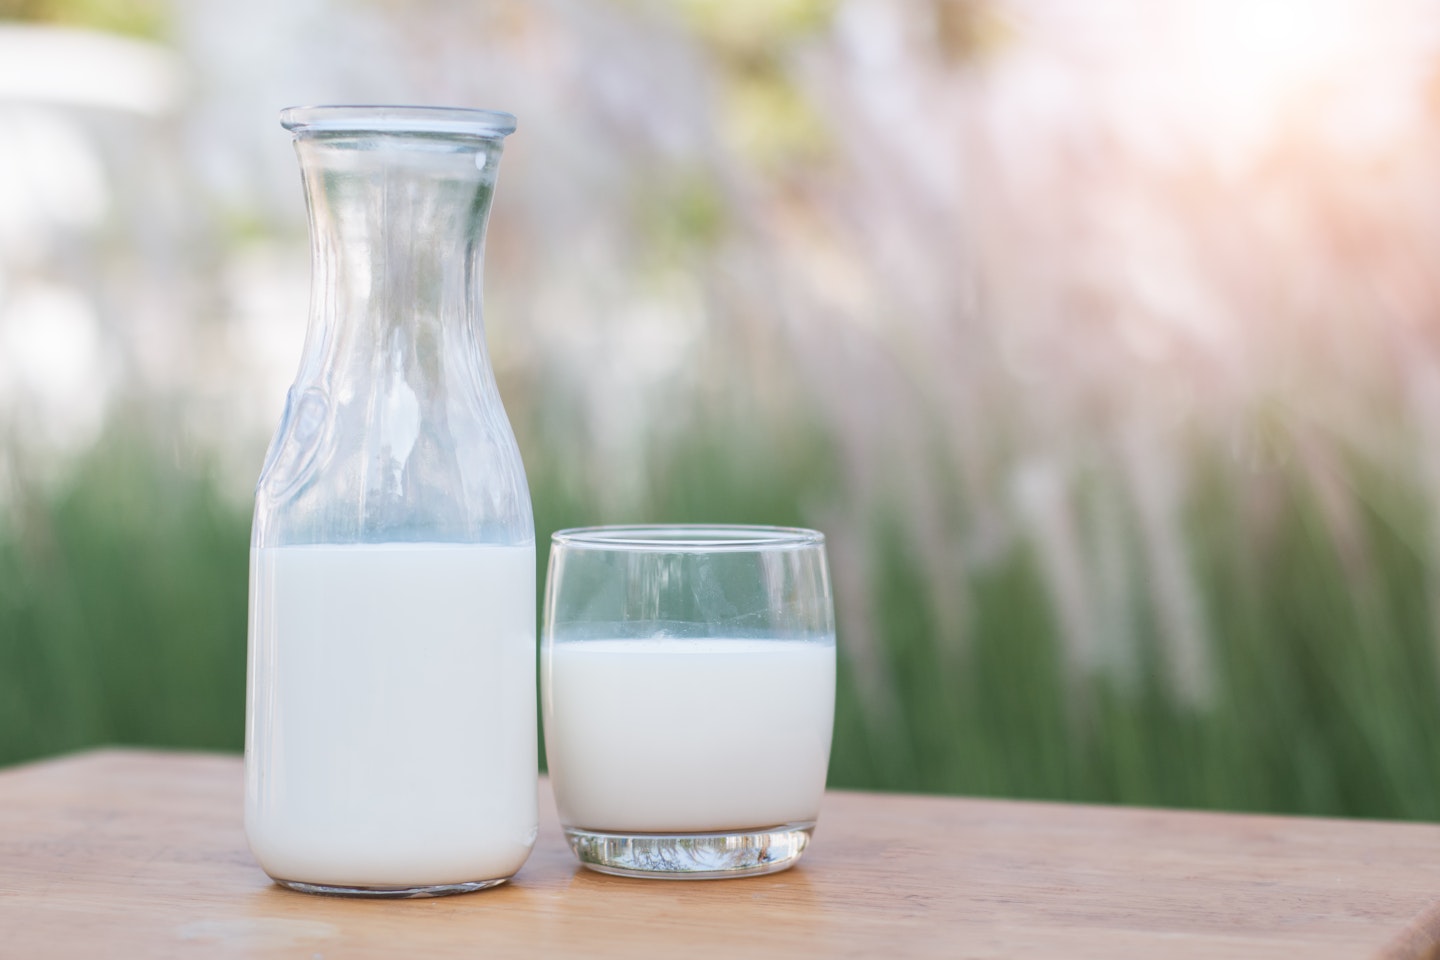 Drink milk for its calcium and vitamin D benefits